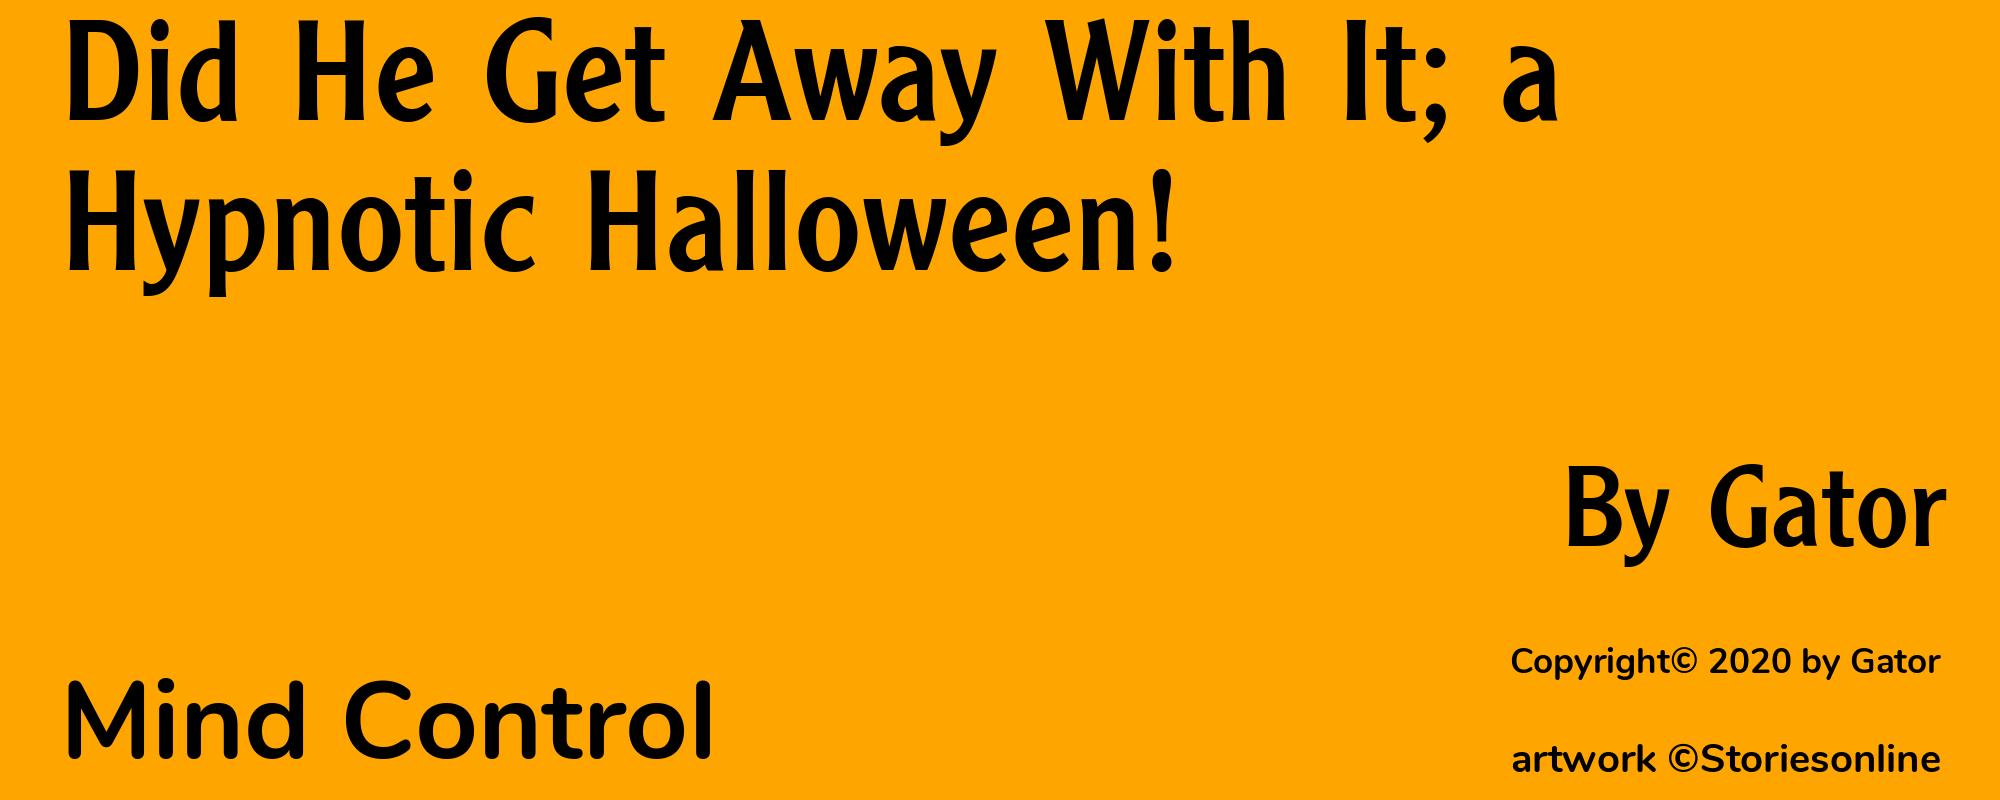 Did He Get Away With It; a Hypnotic Halloween! - Cover